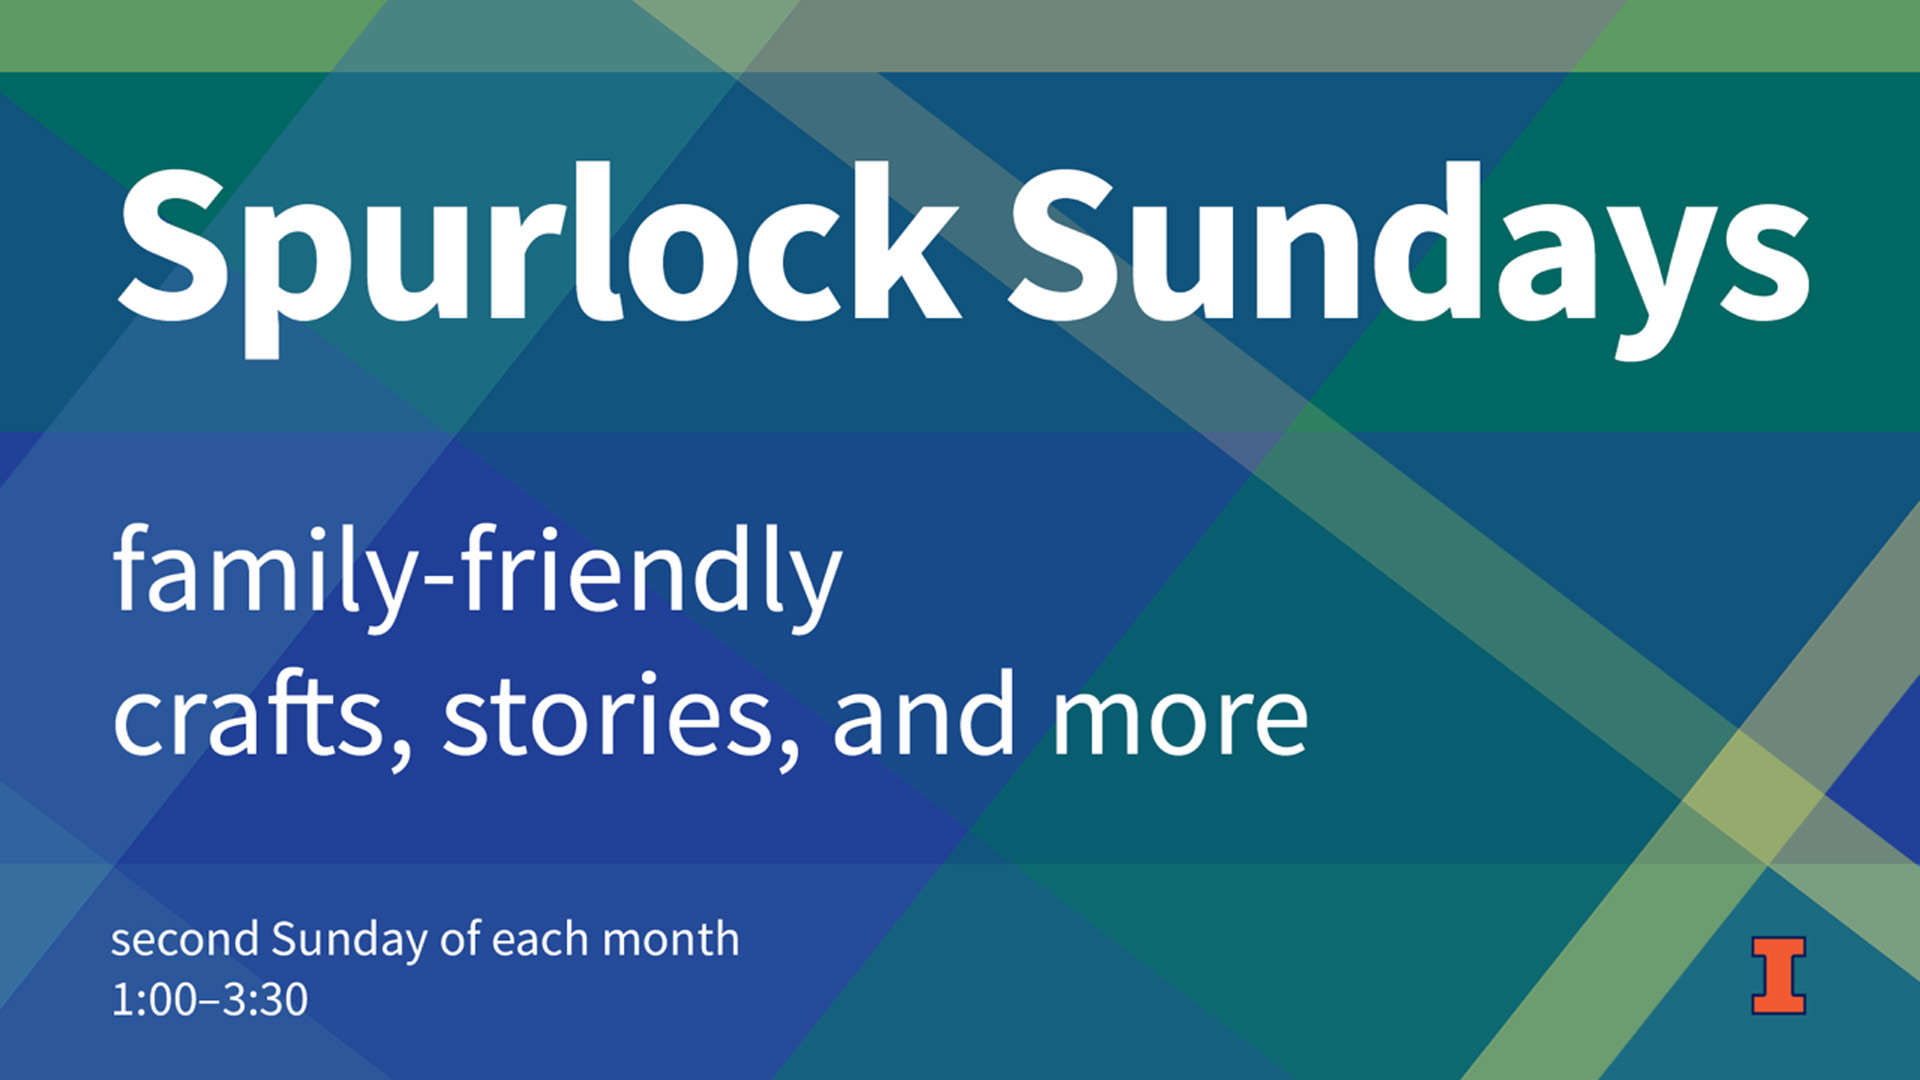 text saying "Spurlock Sundays family-friendly crafts, stories, and more second Sunday of each month 1:00 to 3:30 on a plaid backdrop